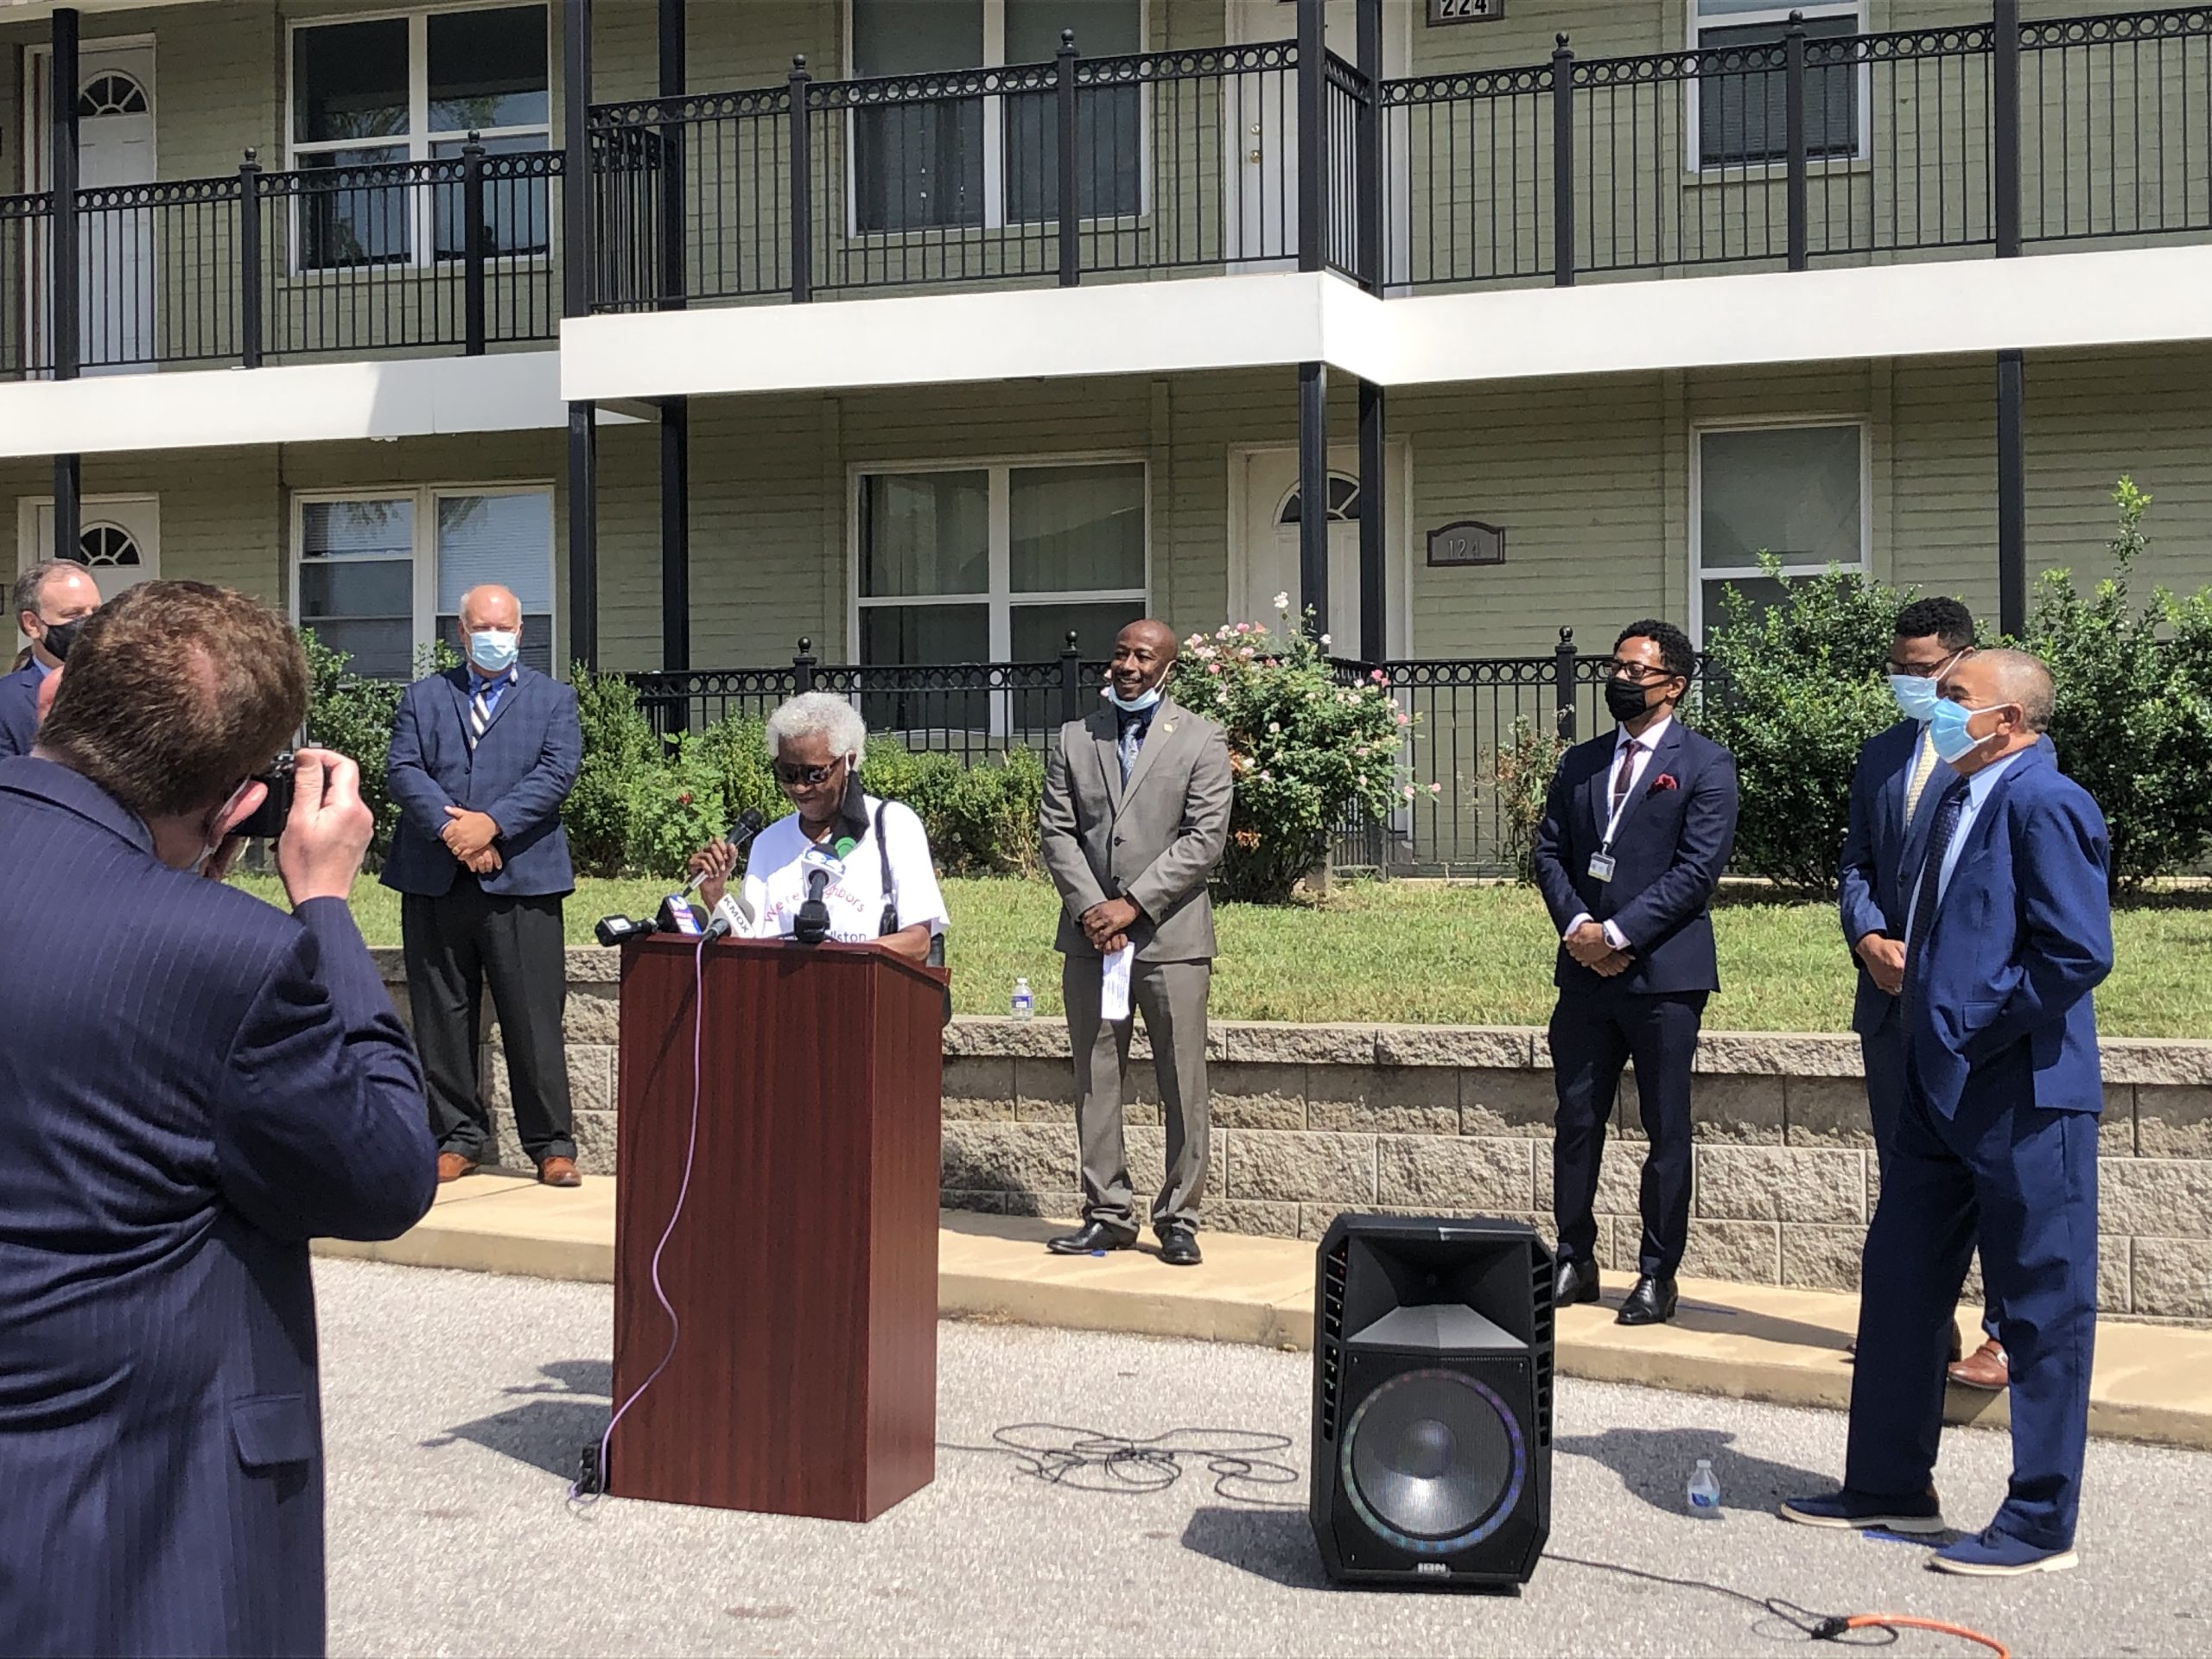 A Black woman with white hair stands at a podium in the parking lot of a residential building (in Wellston, Missouri). She is wearing sunglasses and smiling. Behind here are six men of varying ages, all in suits, most wearing masks. In the foreground is a back view of a photographer.